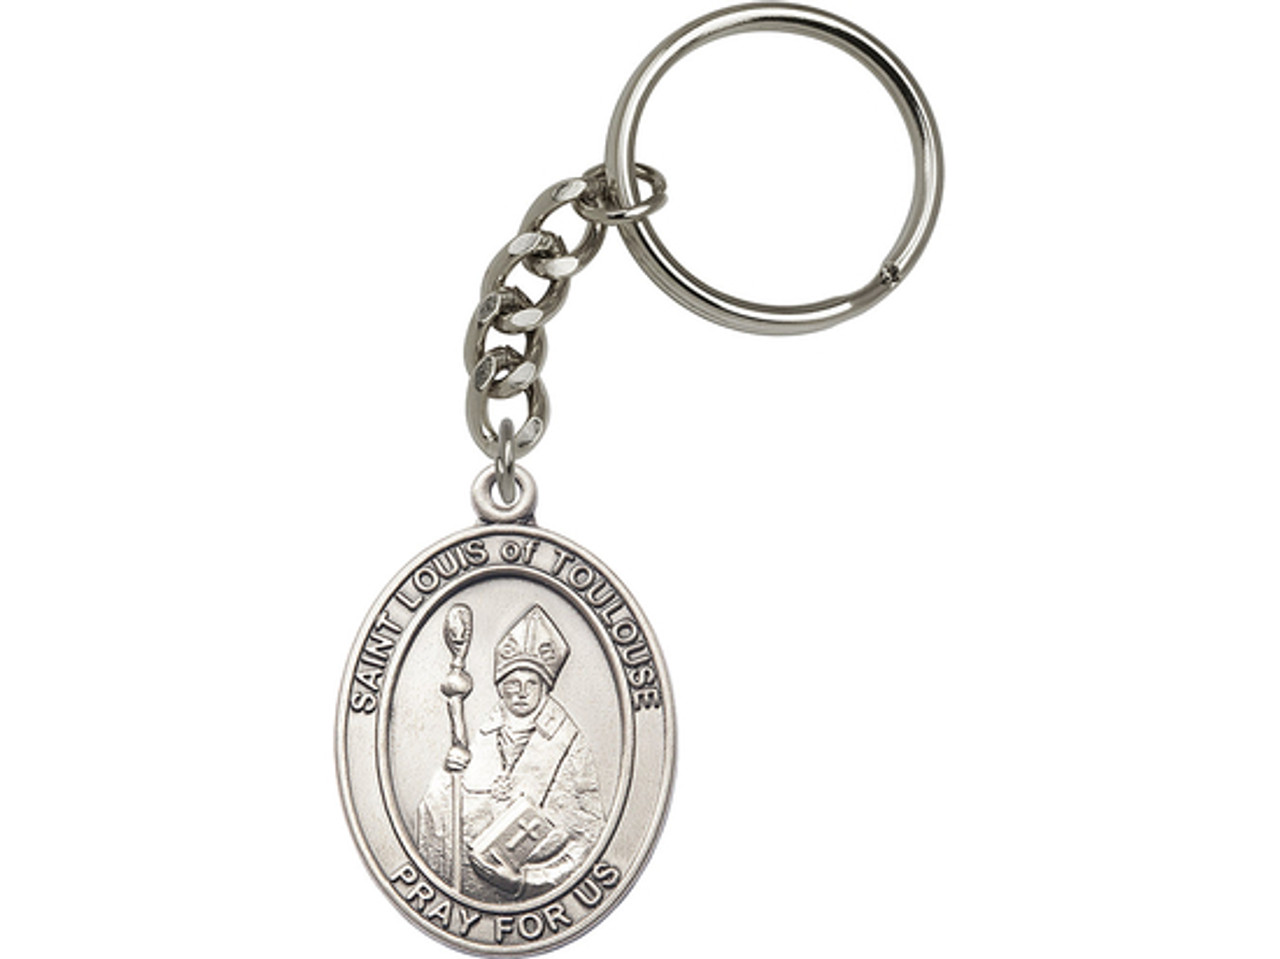 Sisters of Carmel: St. Louis of Toulouse Key Chain